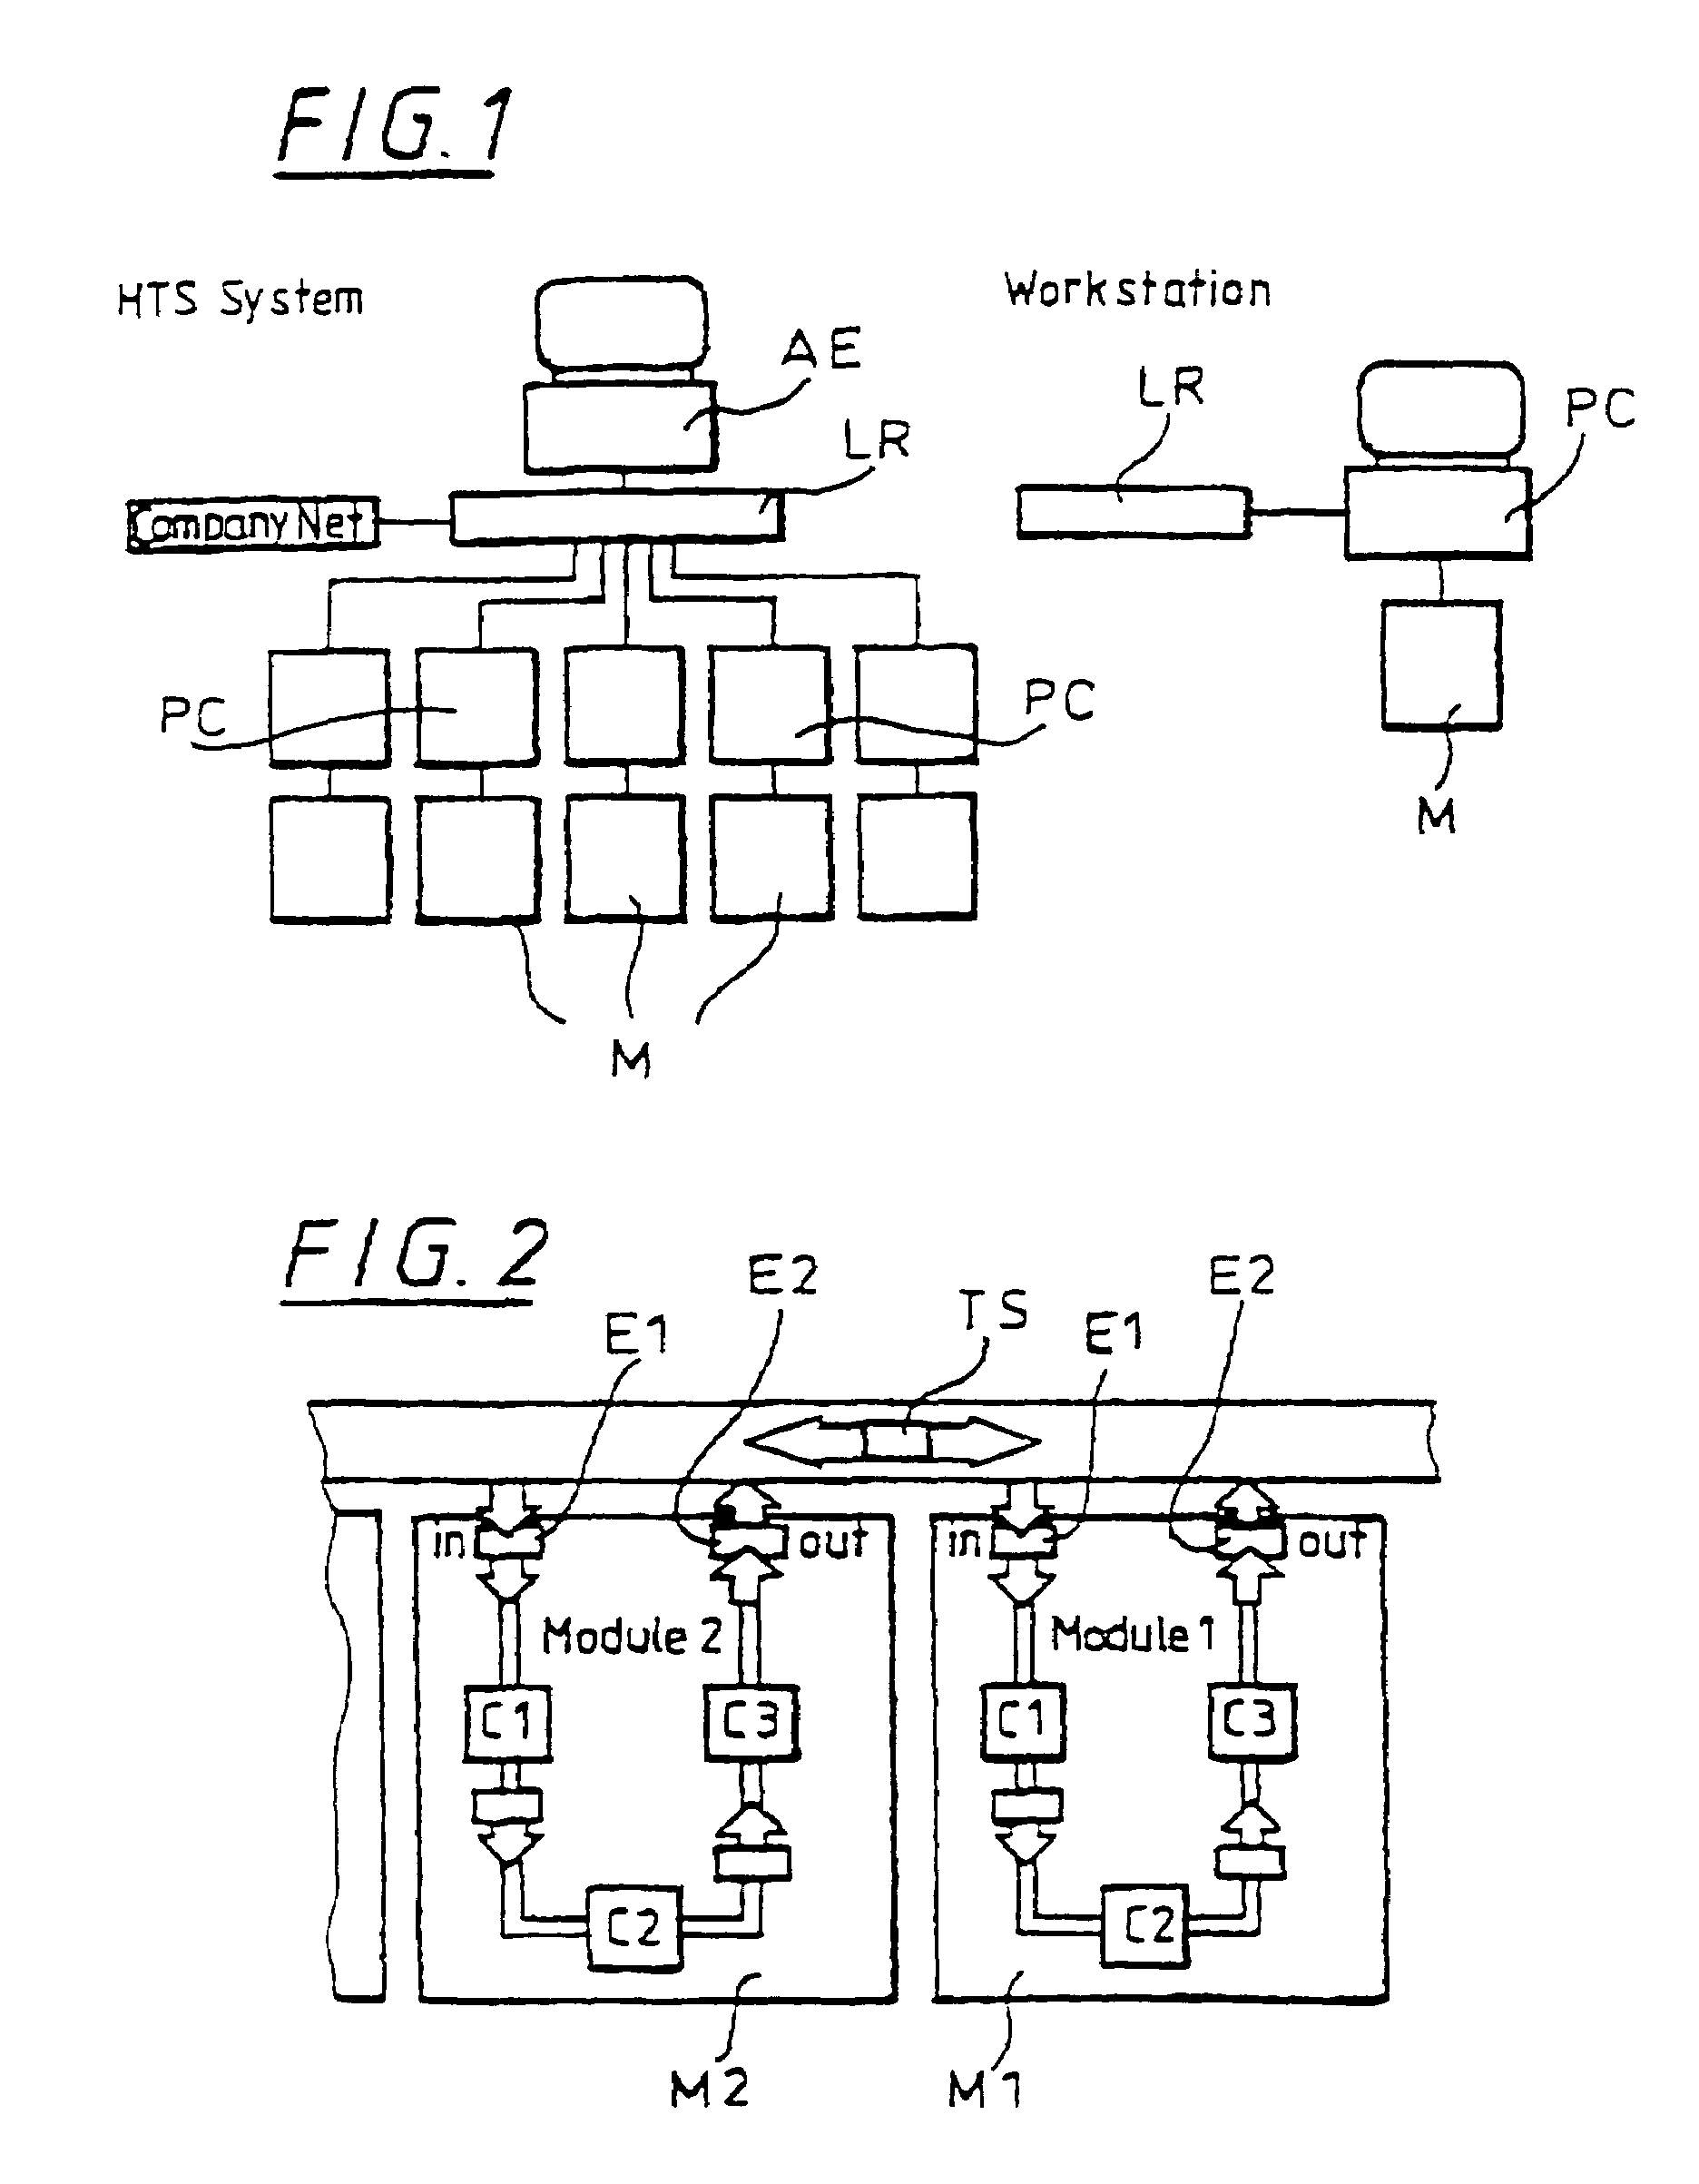 Device for transporting and handling microtiter plates